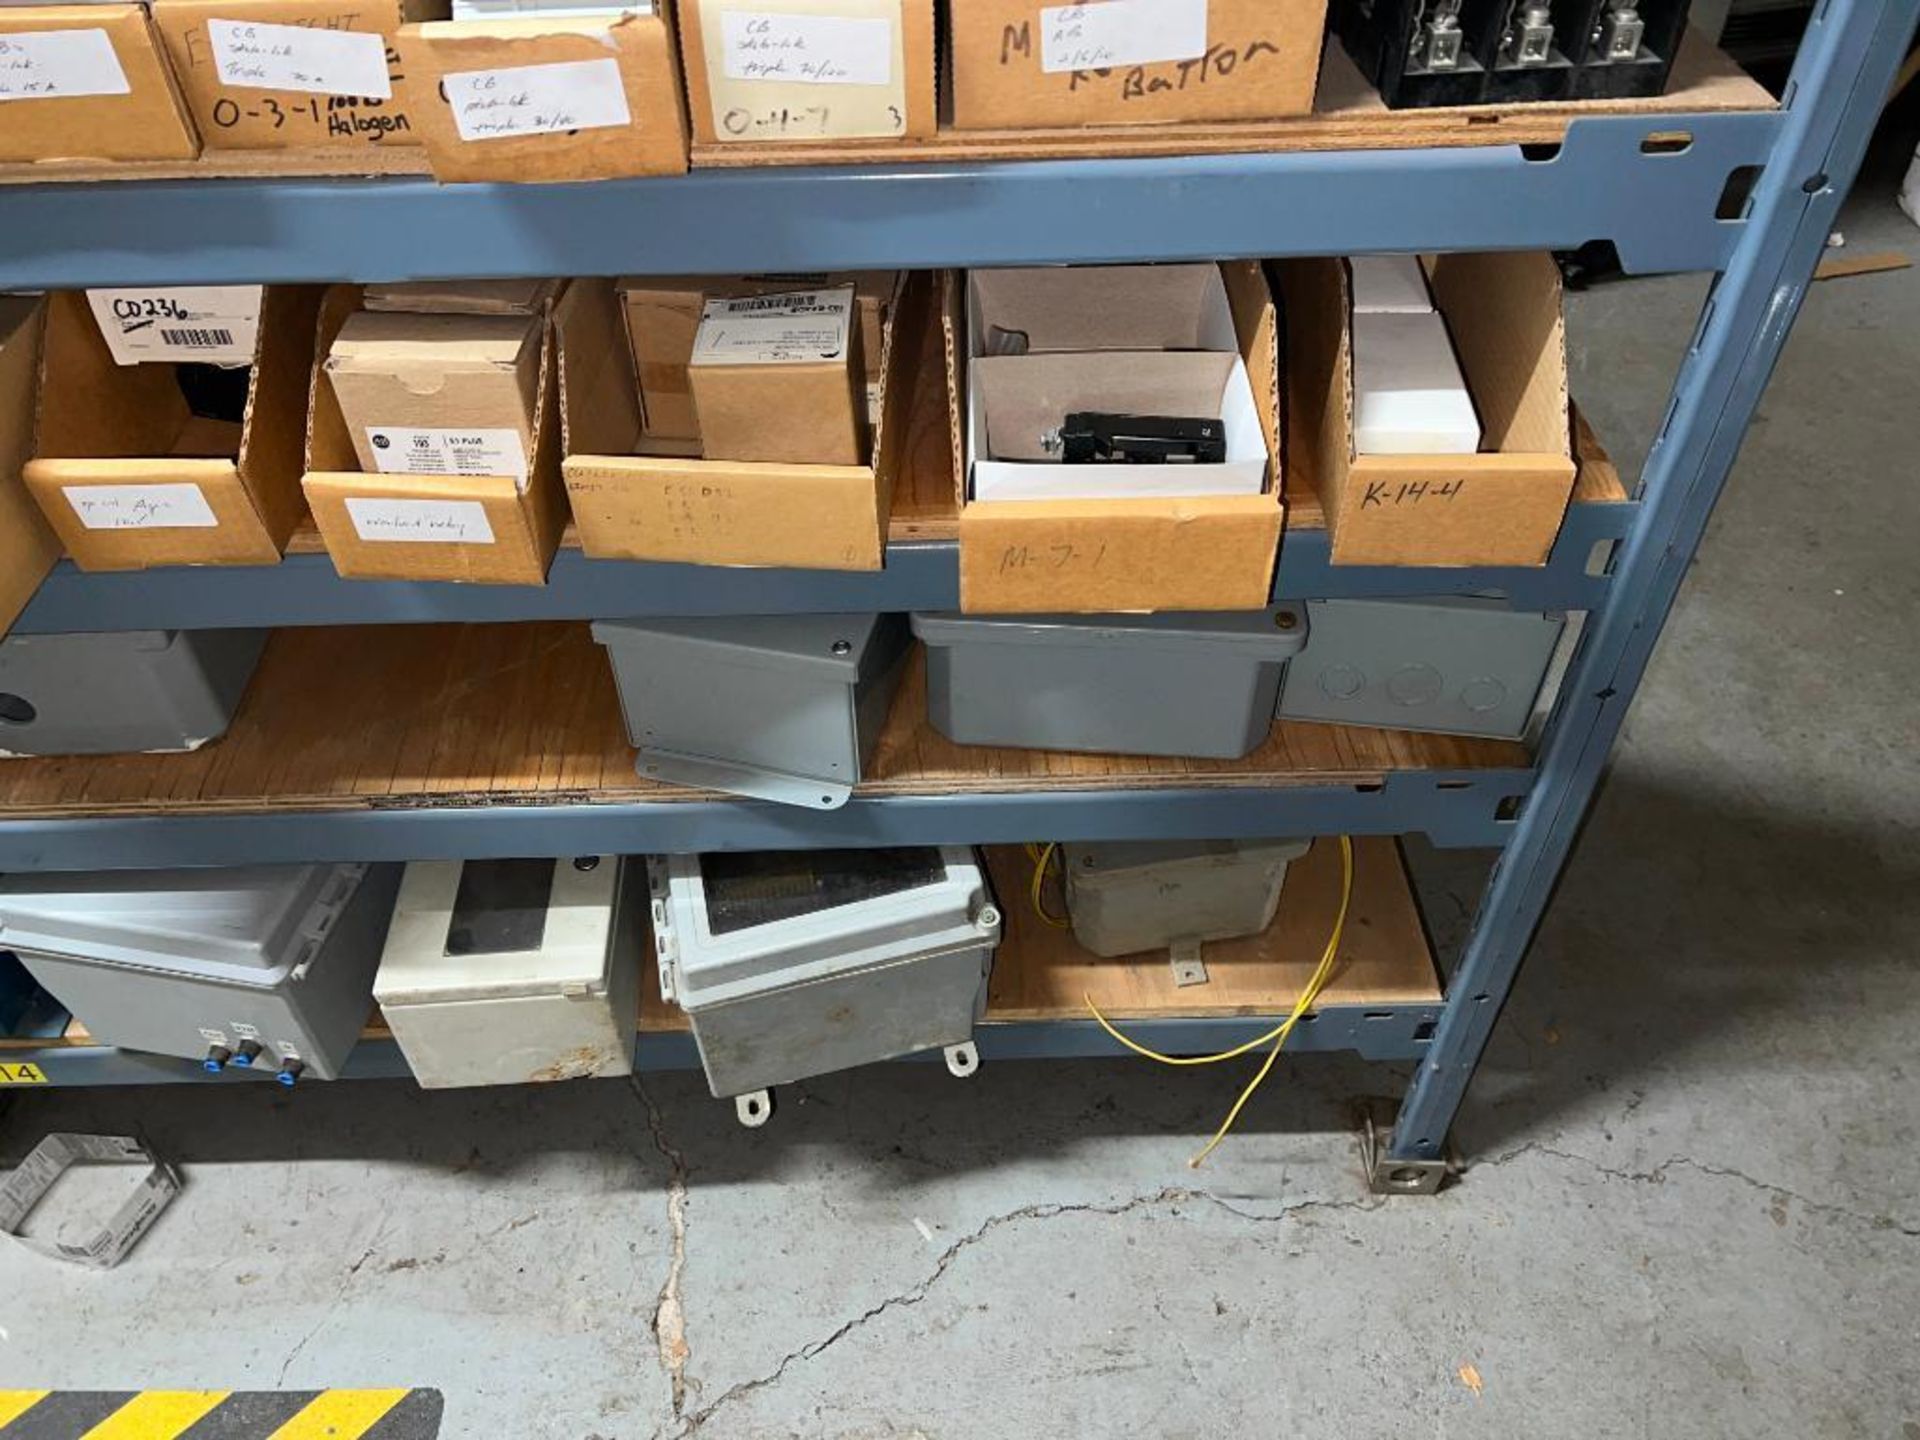 Assorted Electrical Equipment, Including: Circuit Breakers, Conduit, Conduit Adapters and Enclosures - Image 2 of 46